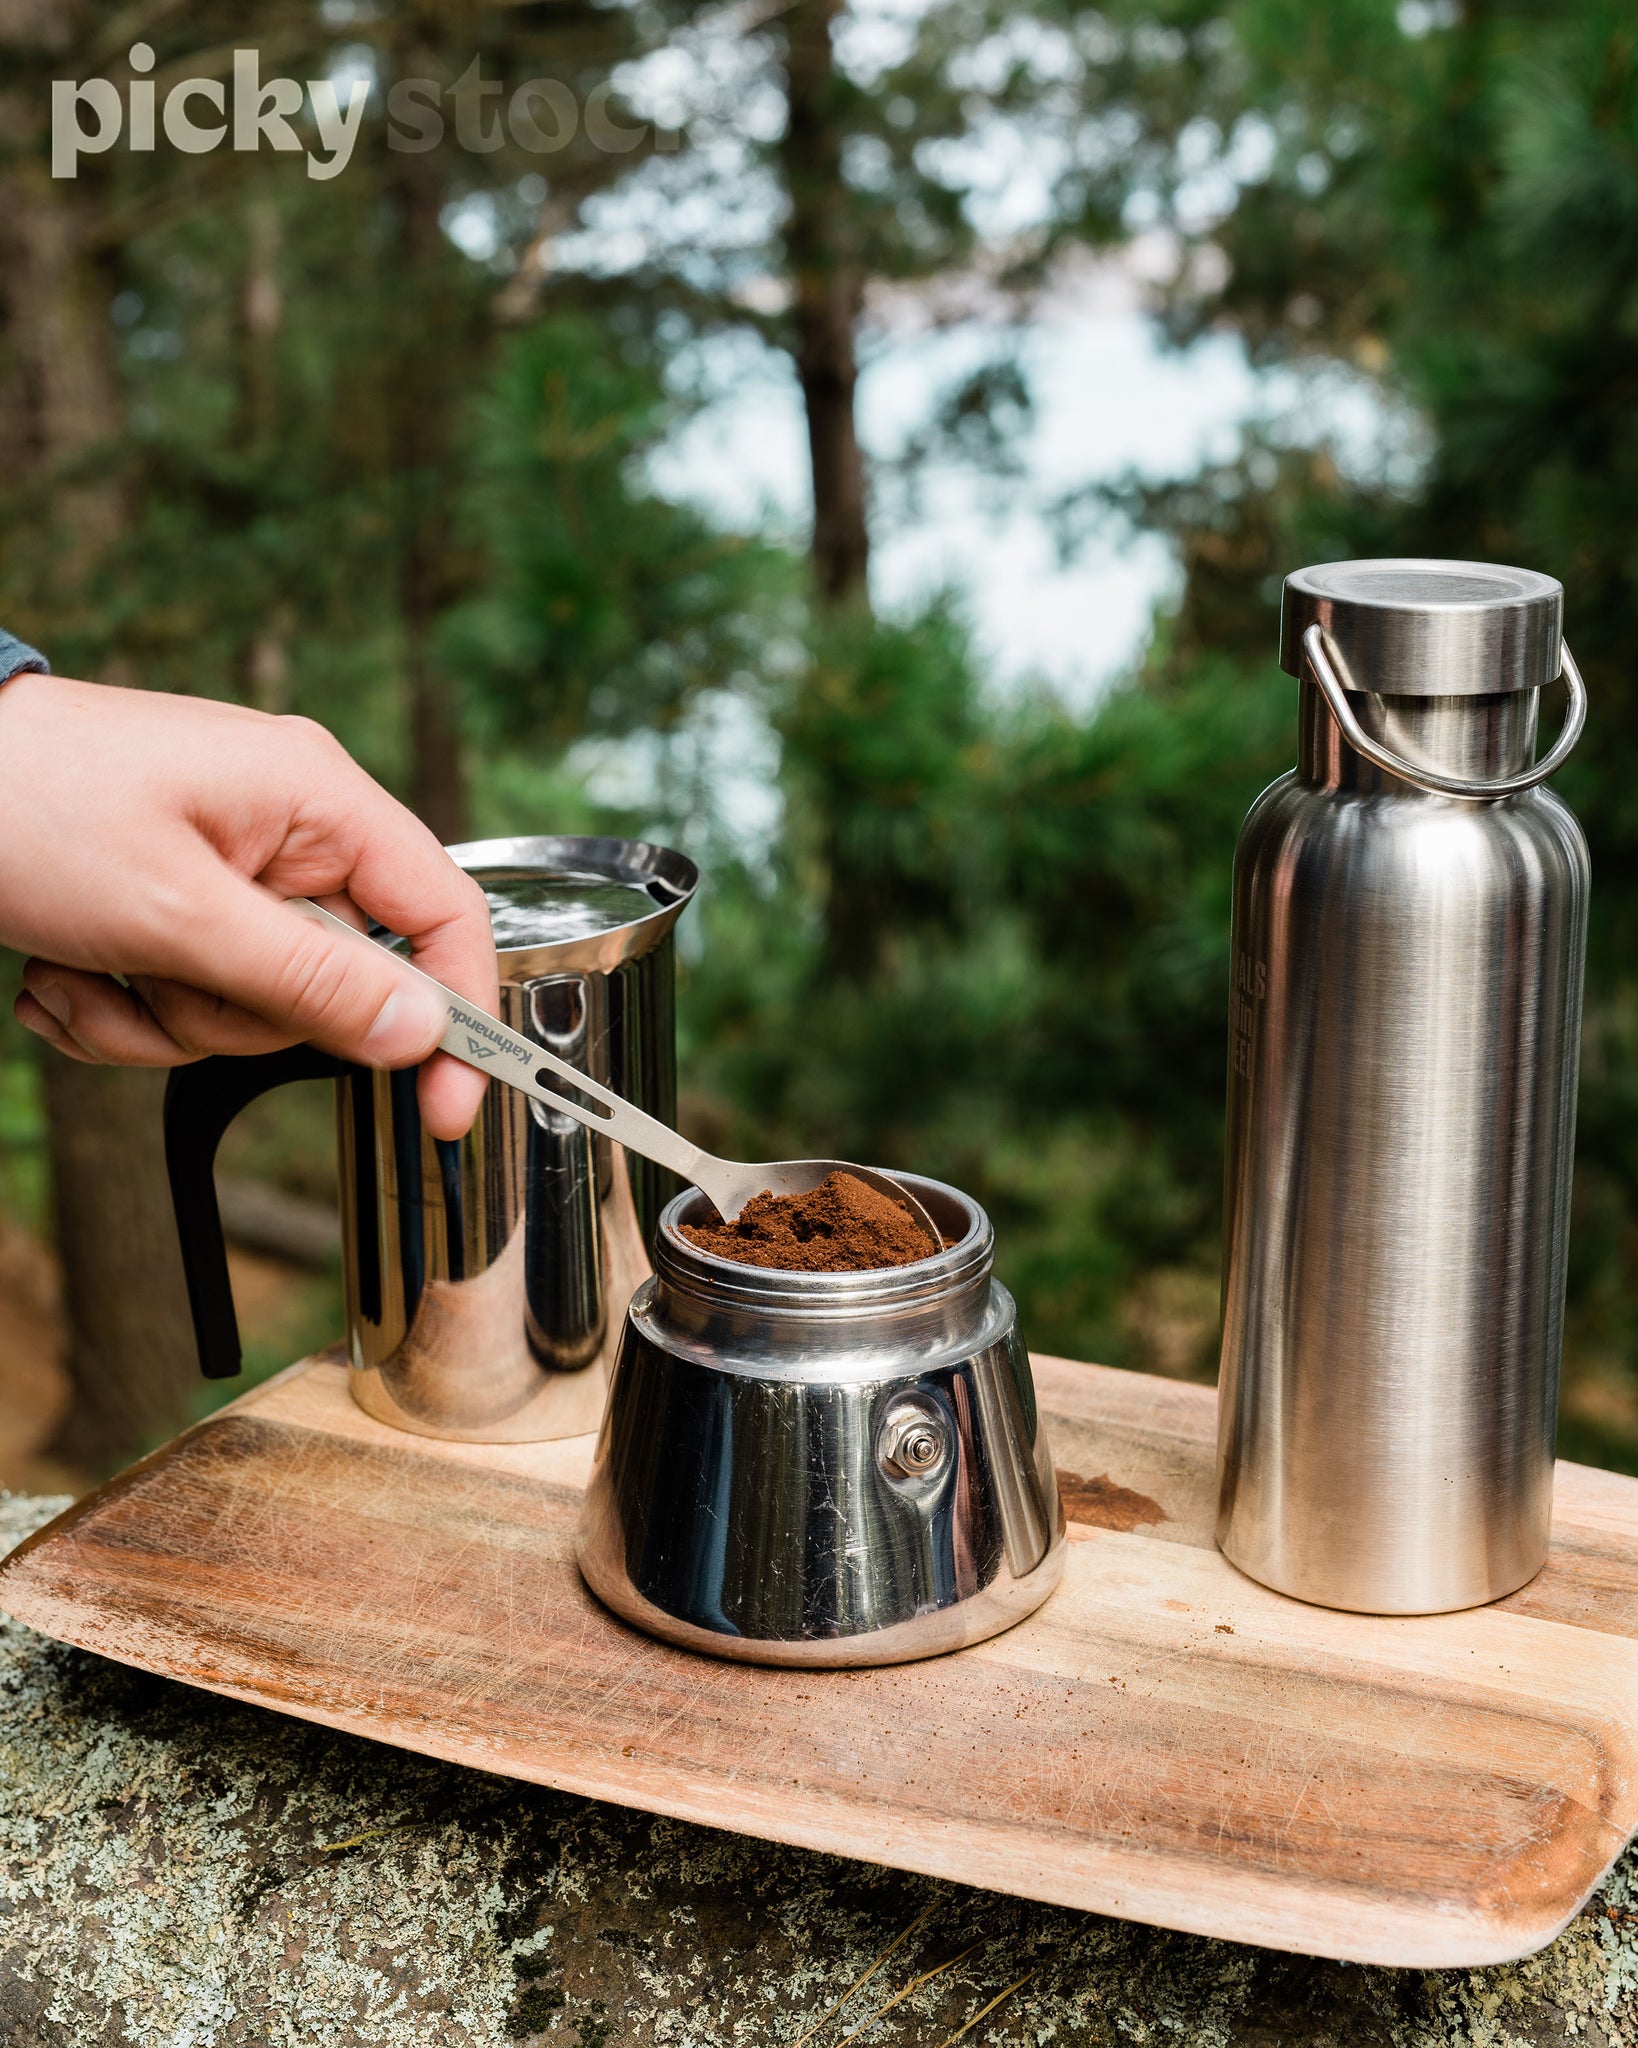 Man scooping coffee portion from jar onto spoon. Coffee container, stainless steel water bottle and jug sitting on top of wooden chopping board, on top of a log. Background is trees and greenery. 